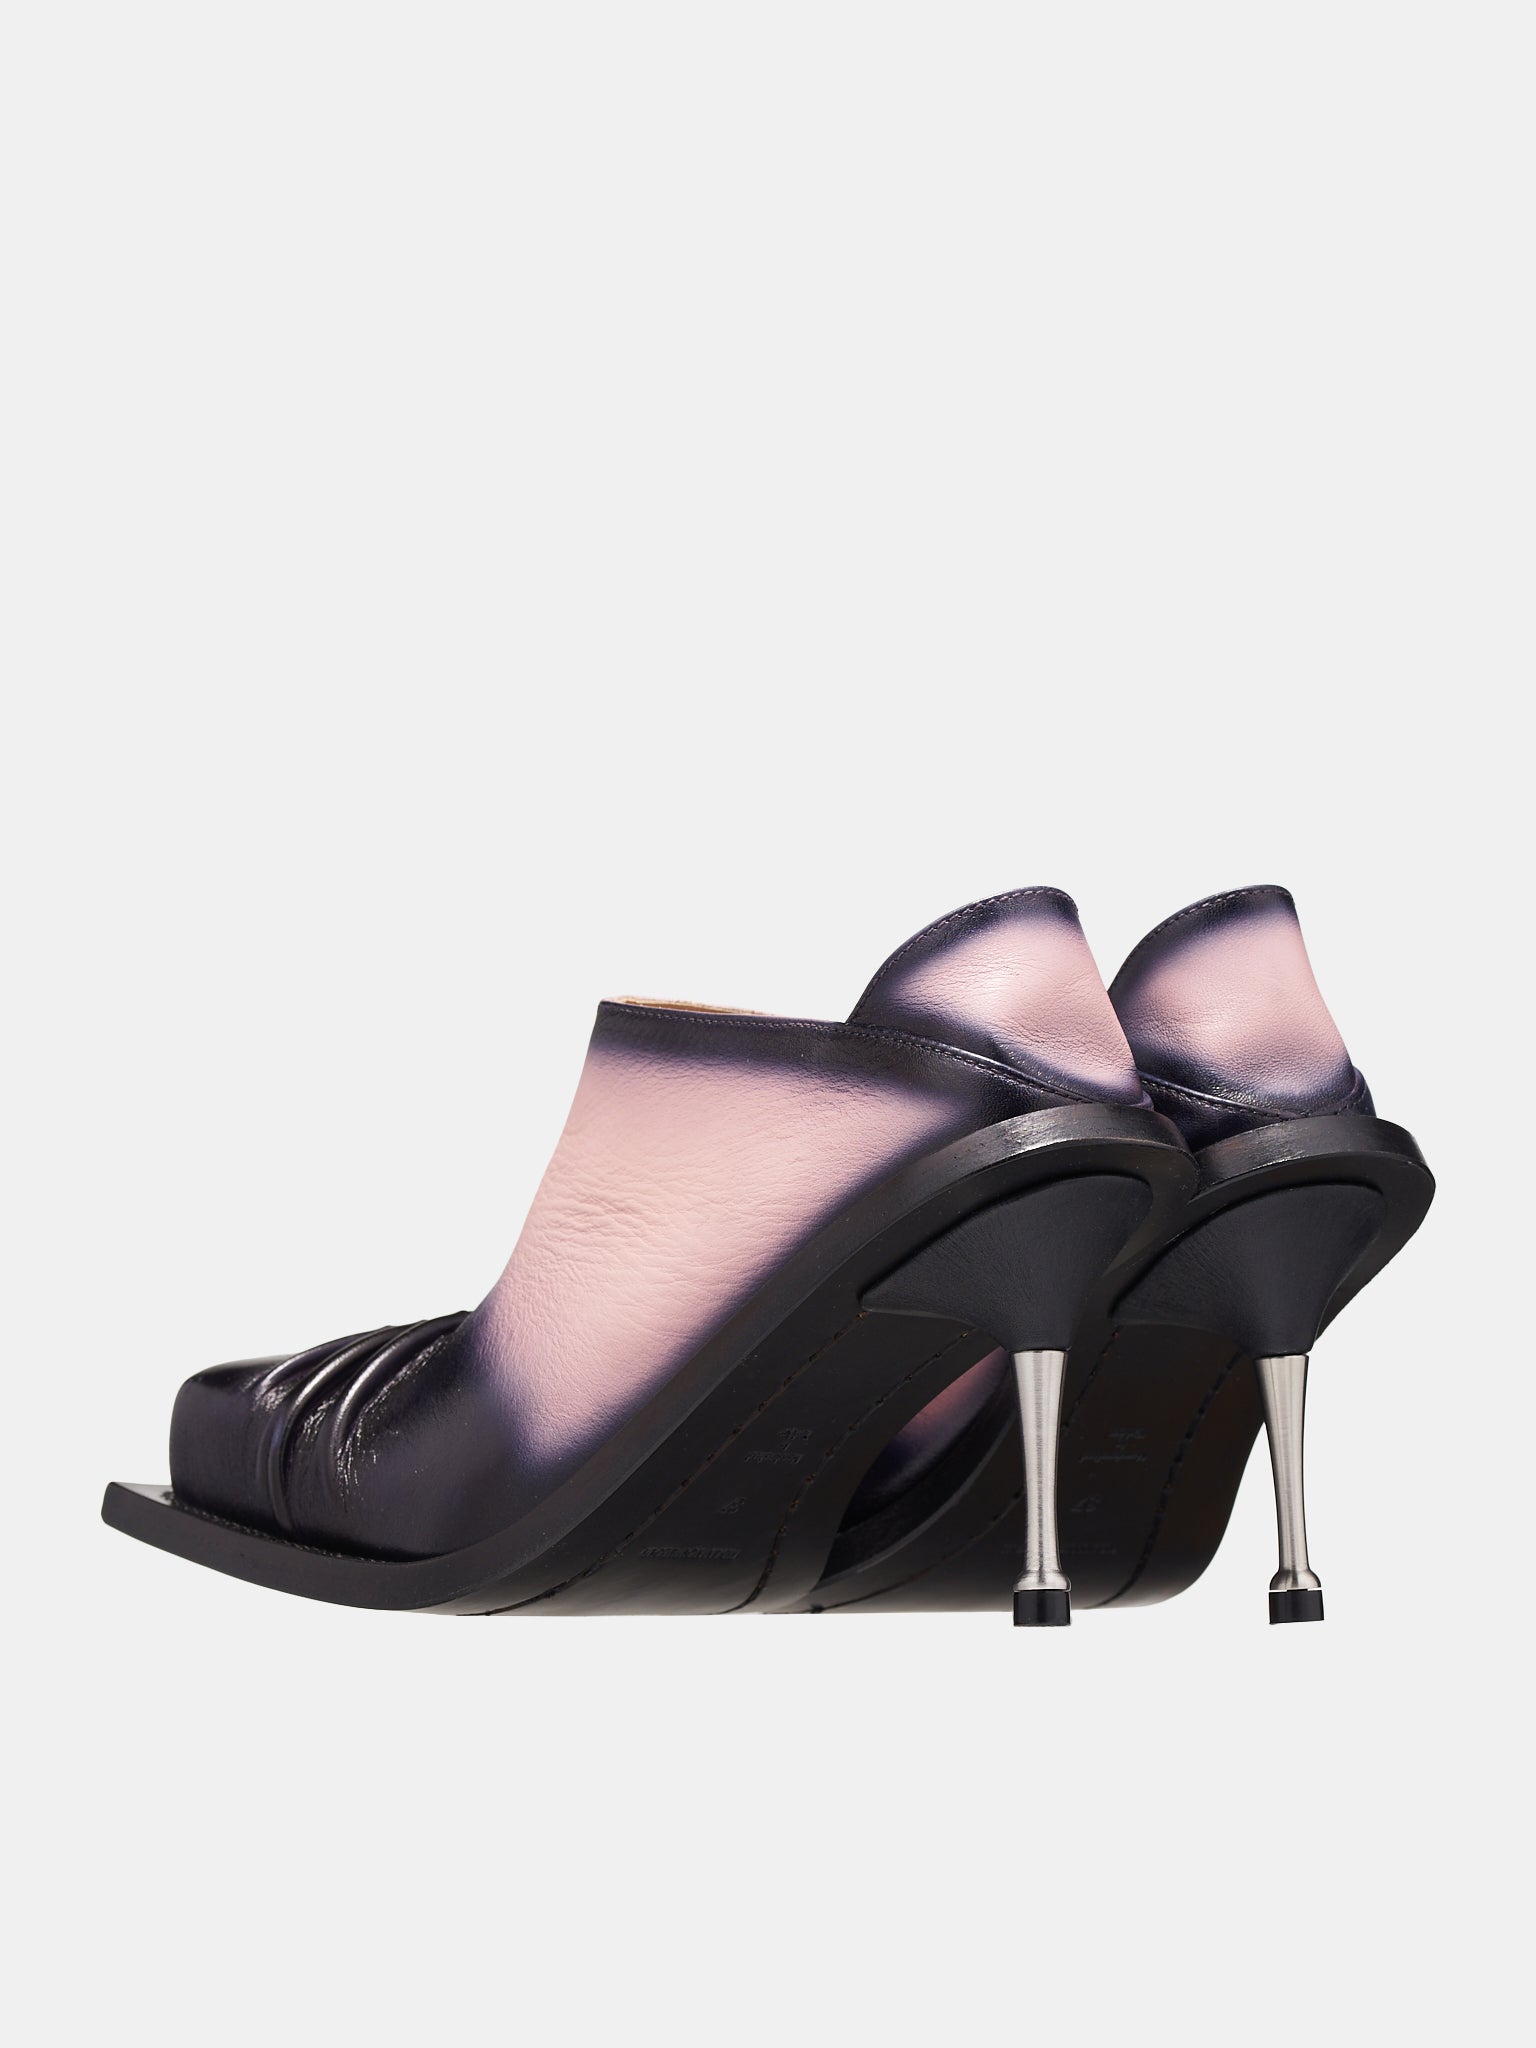 Convertible Mule Pumps (MP02-BABY-PINK)